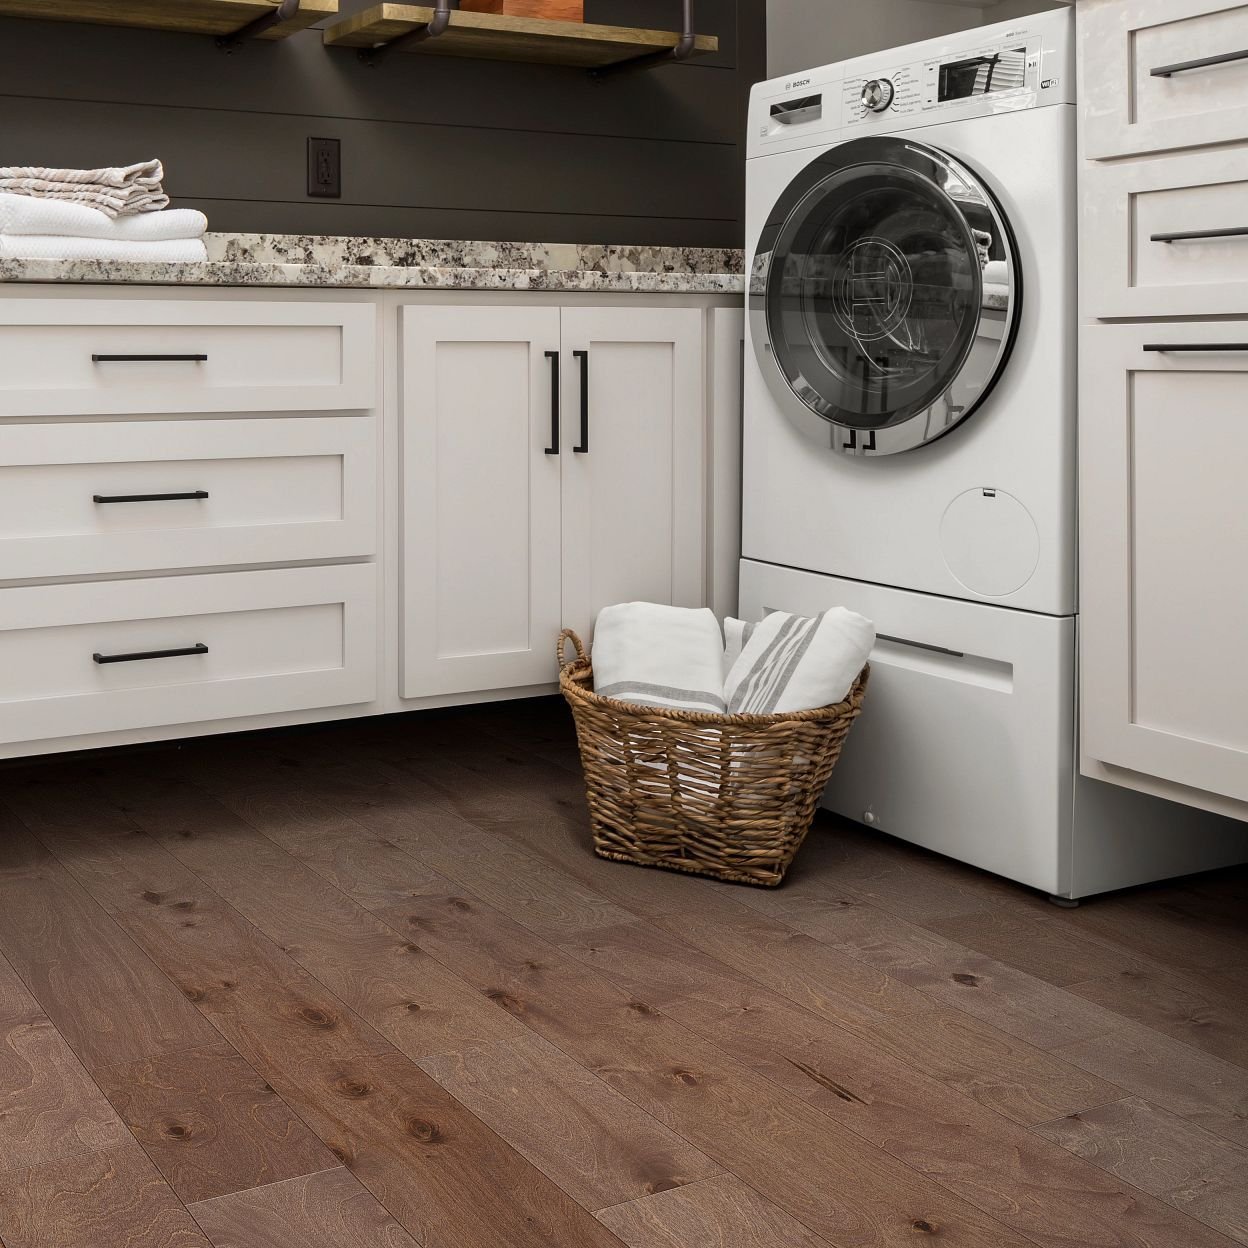 Laundry room - Casual Carpets in Springfield, MO